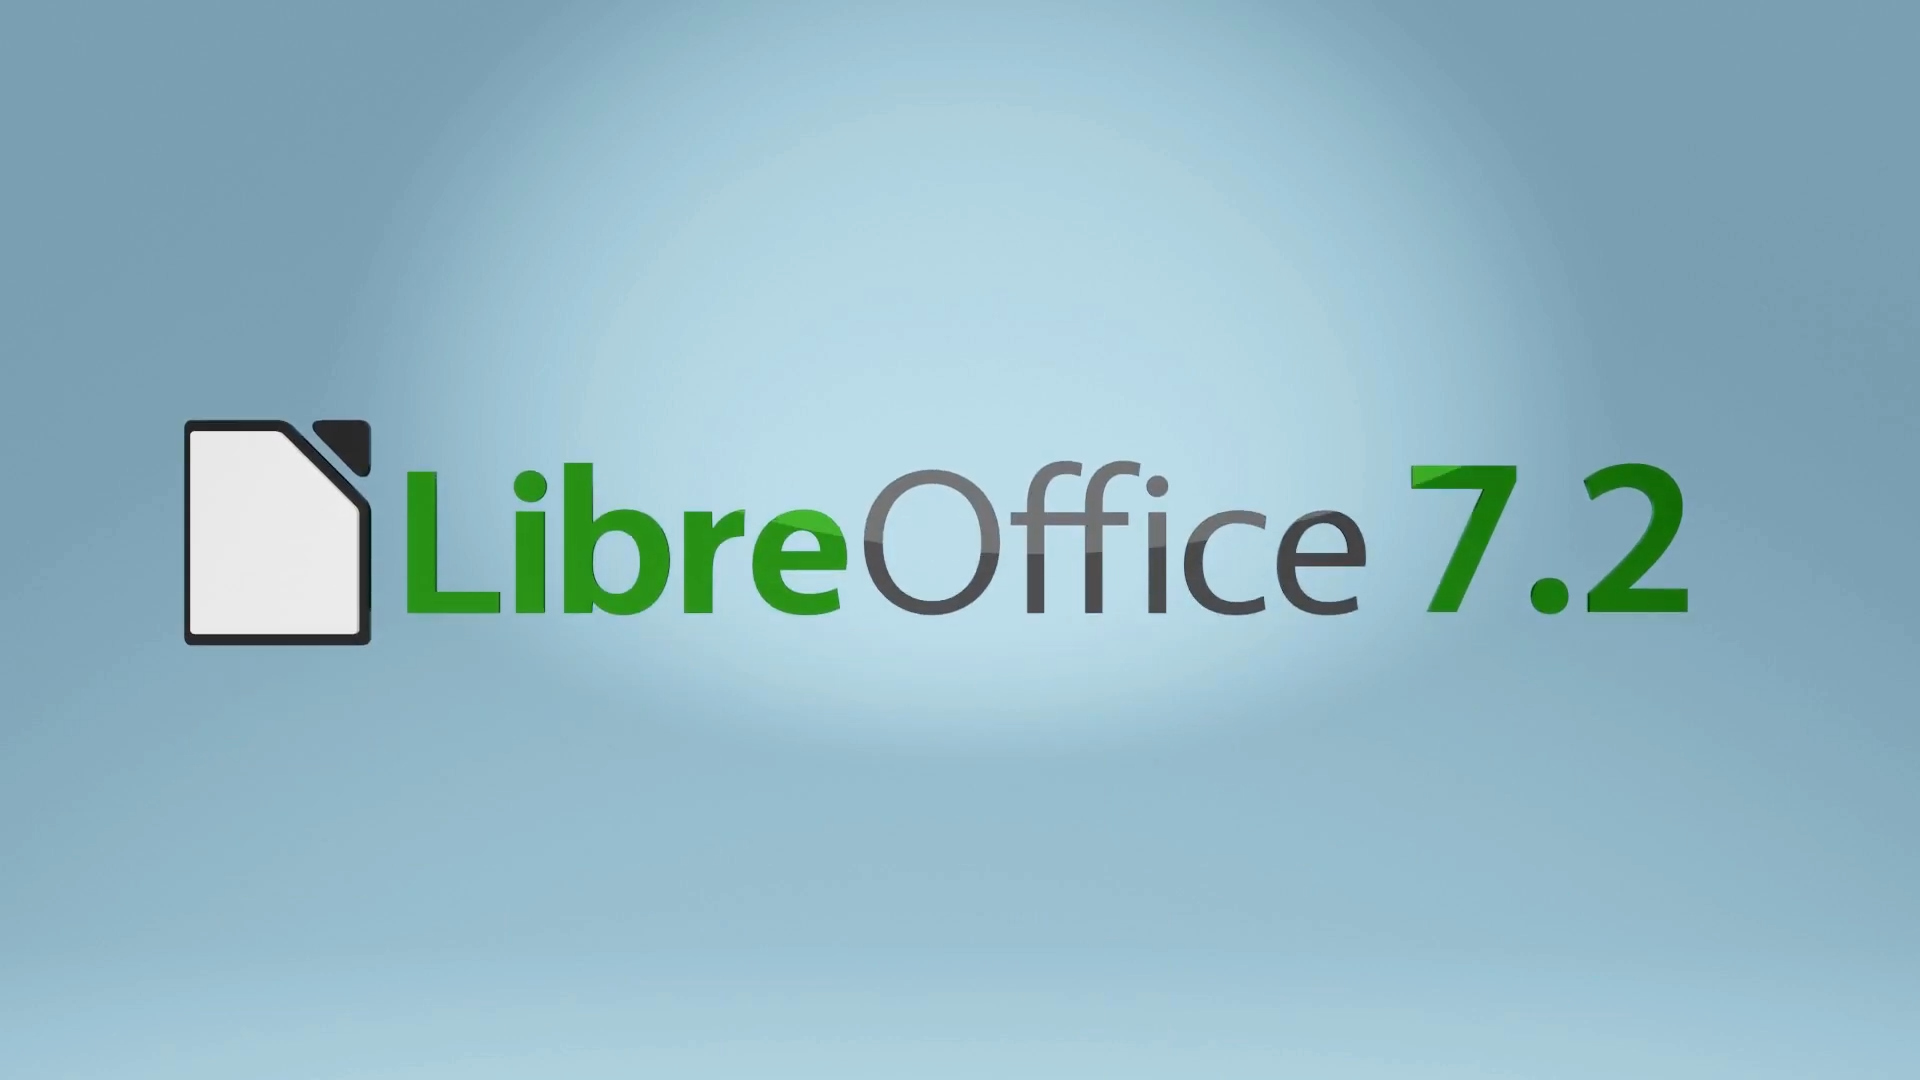 LibreOffice 7.2 Office Suite Is Now Available for Download, This Is What’s New